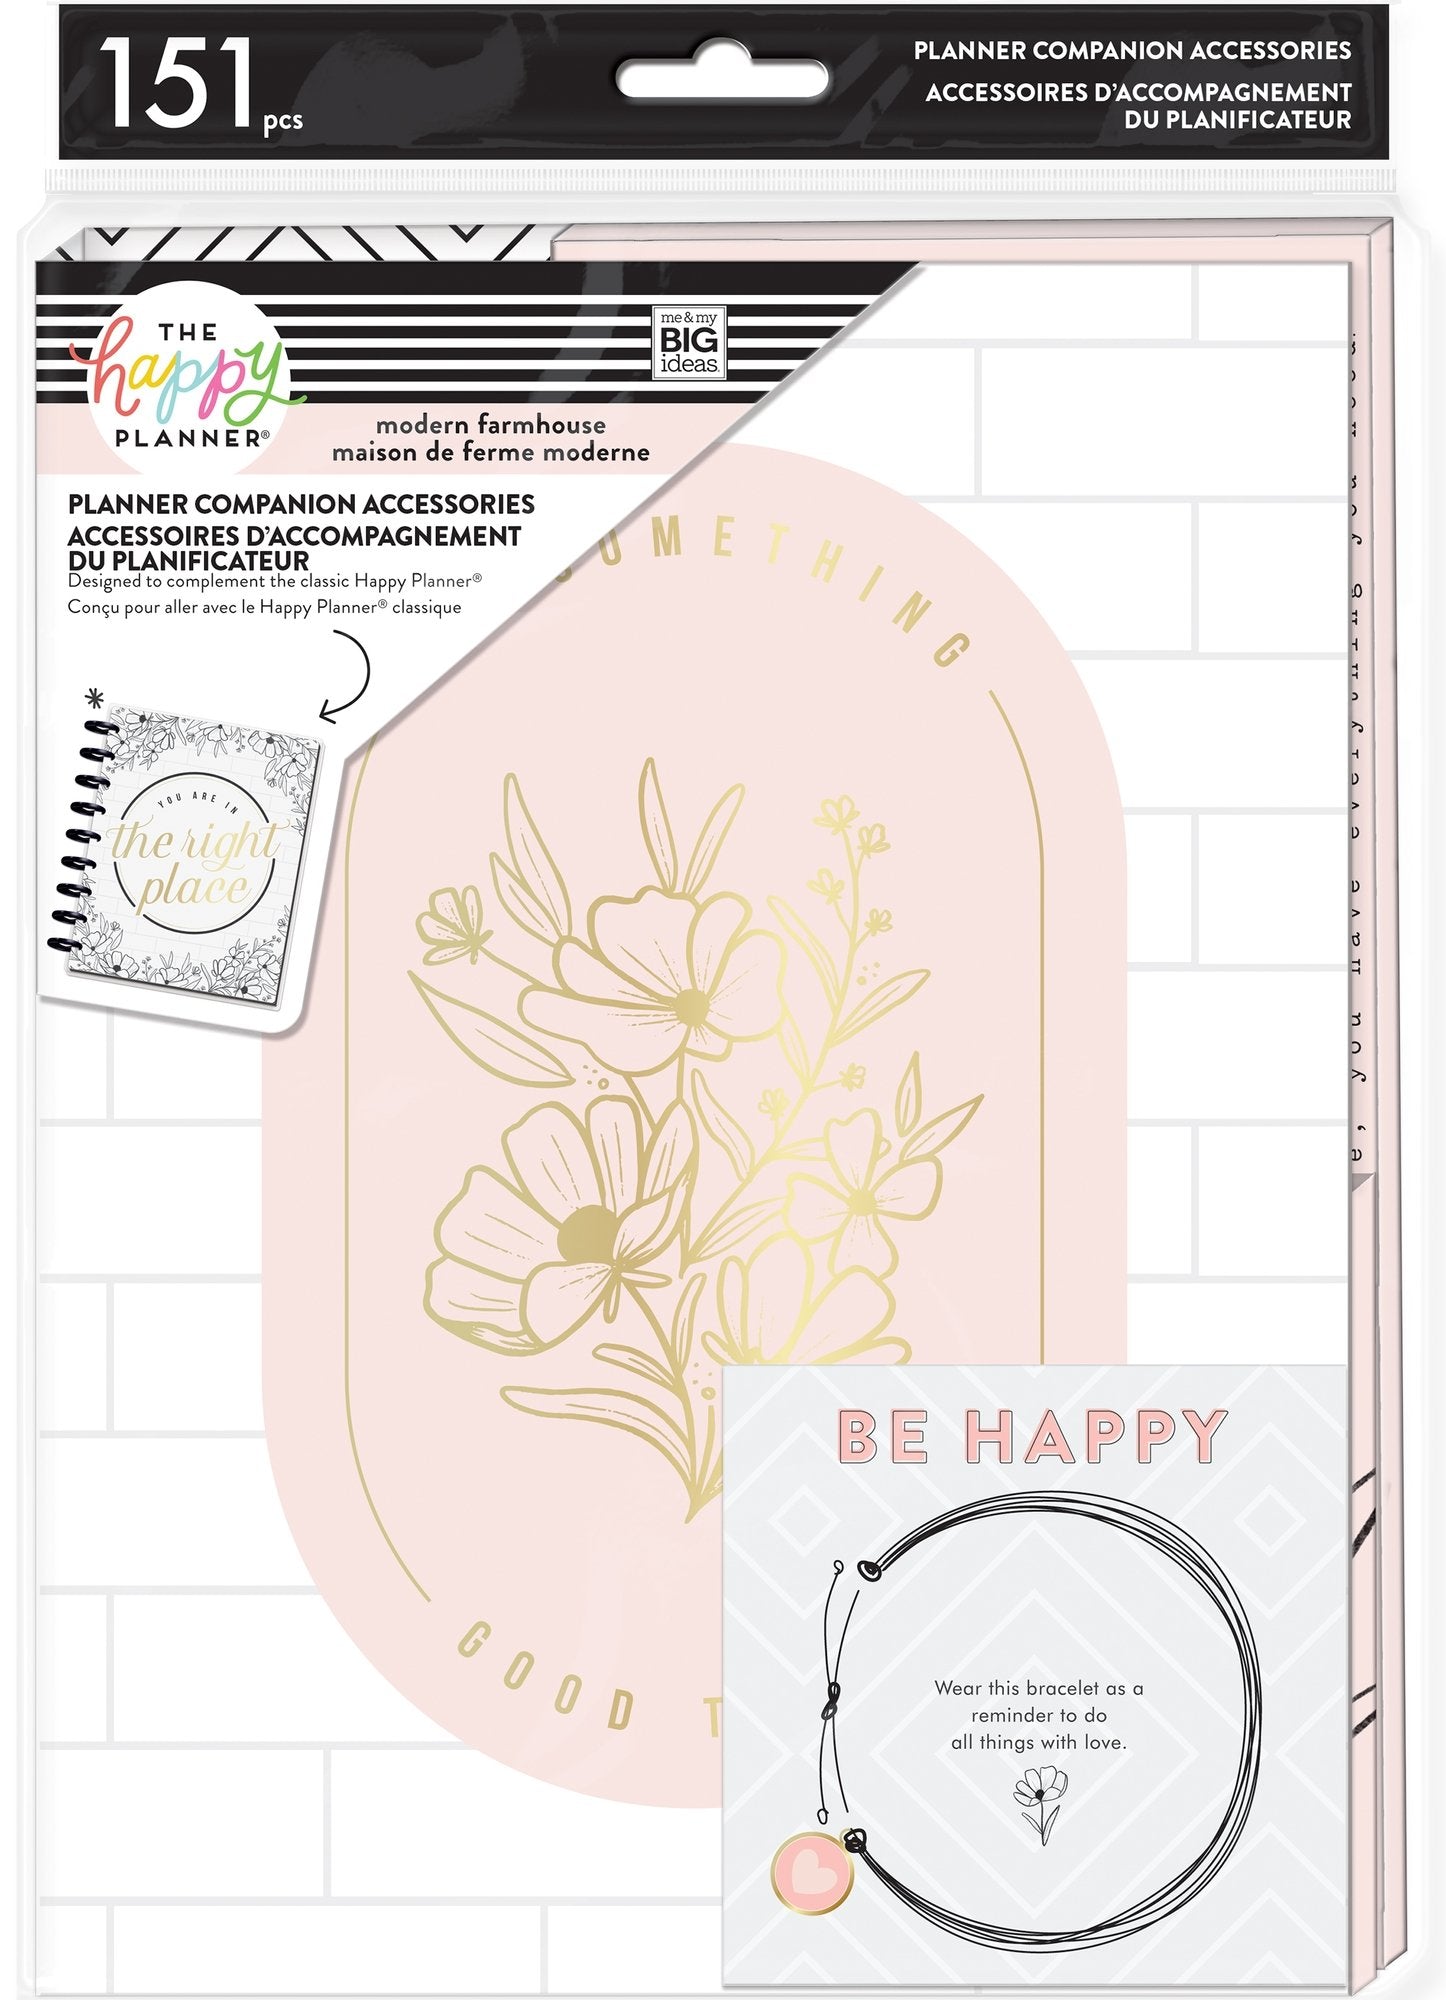 Why we love planner supplies and where to find the best ones in